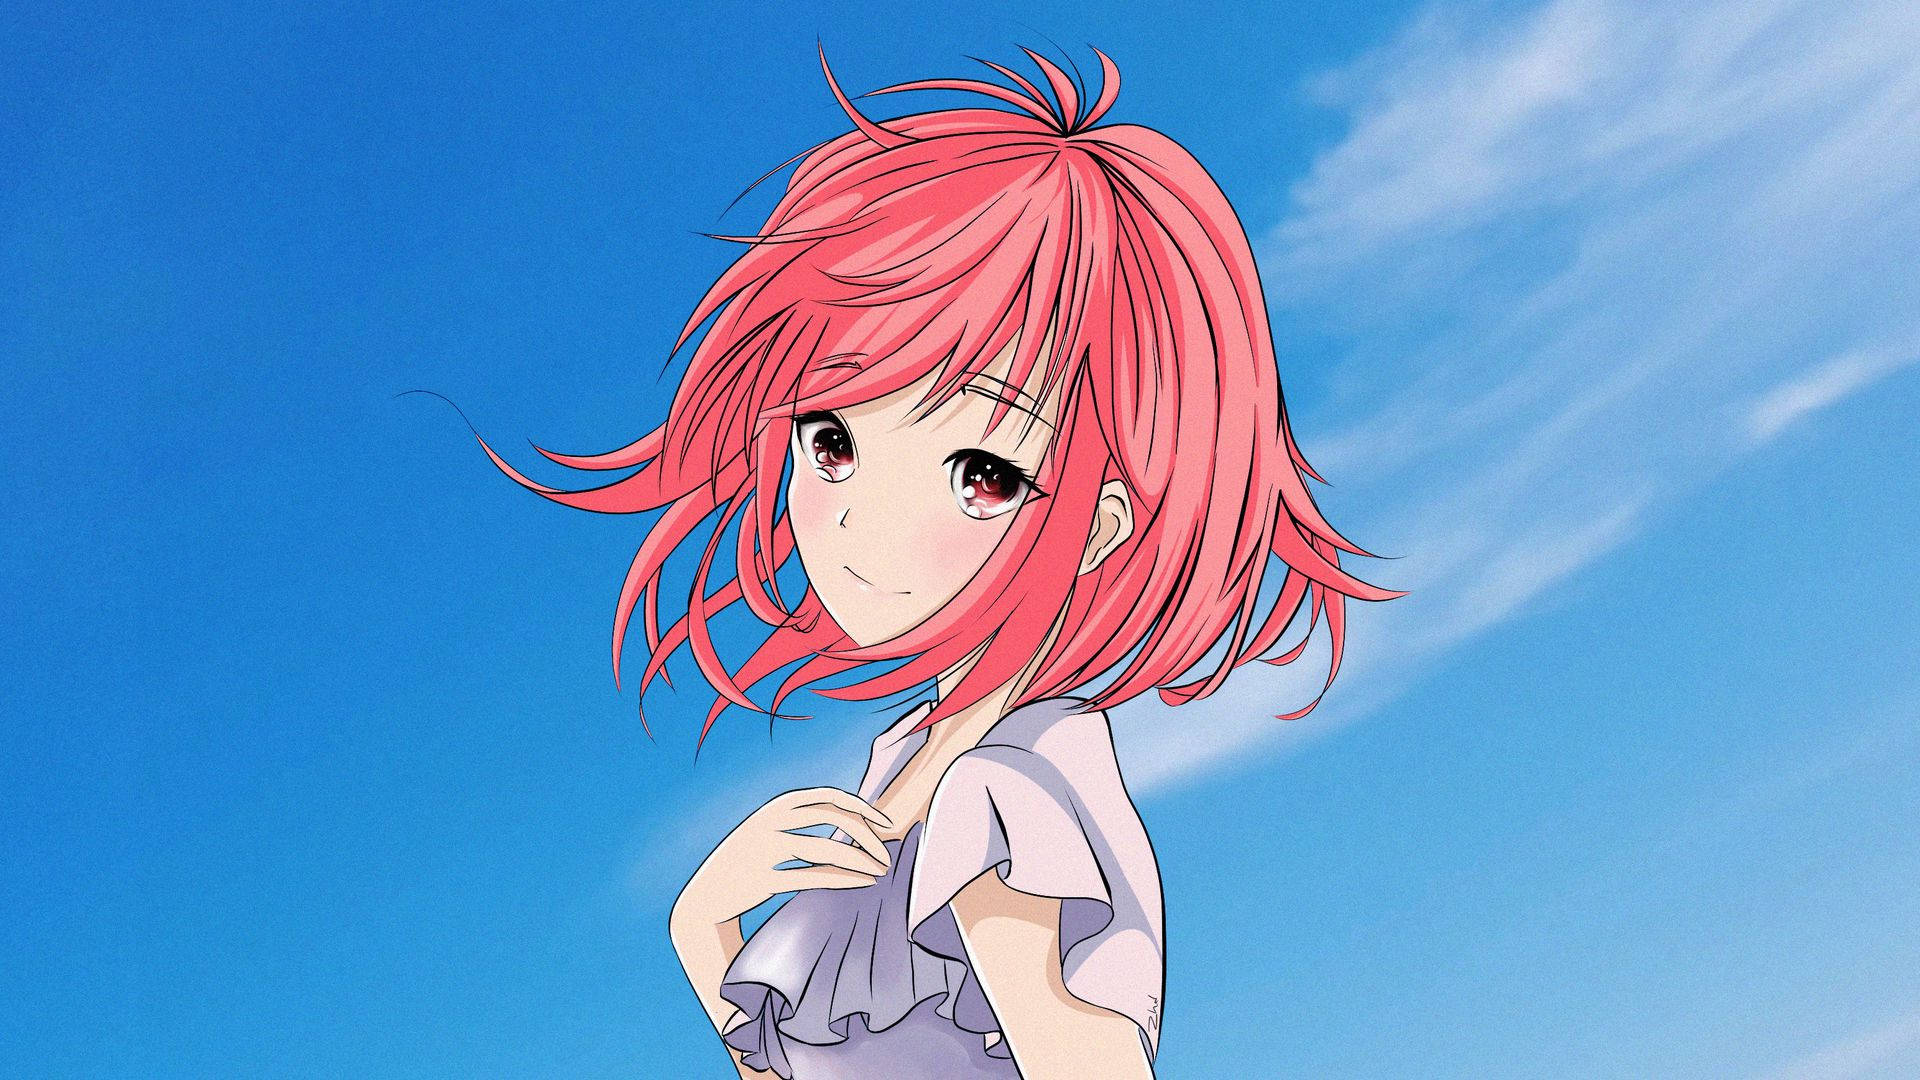 Cute Anime Girl With Pink Hair Wallpaper